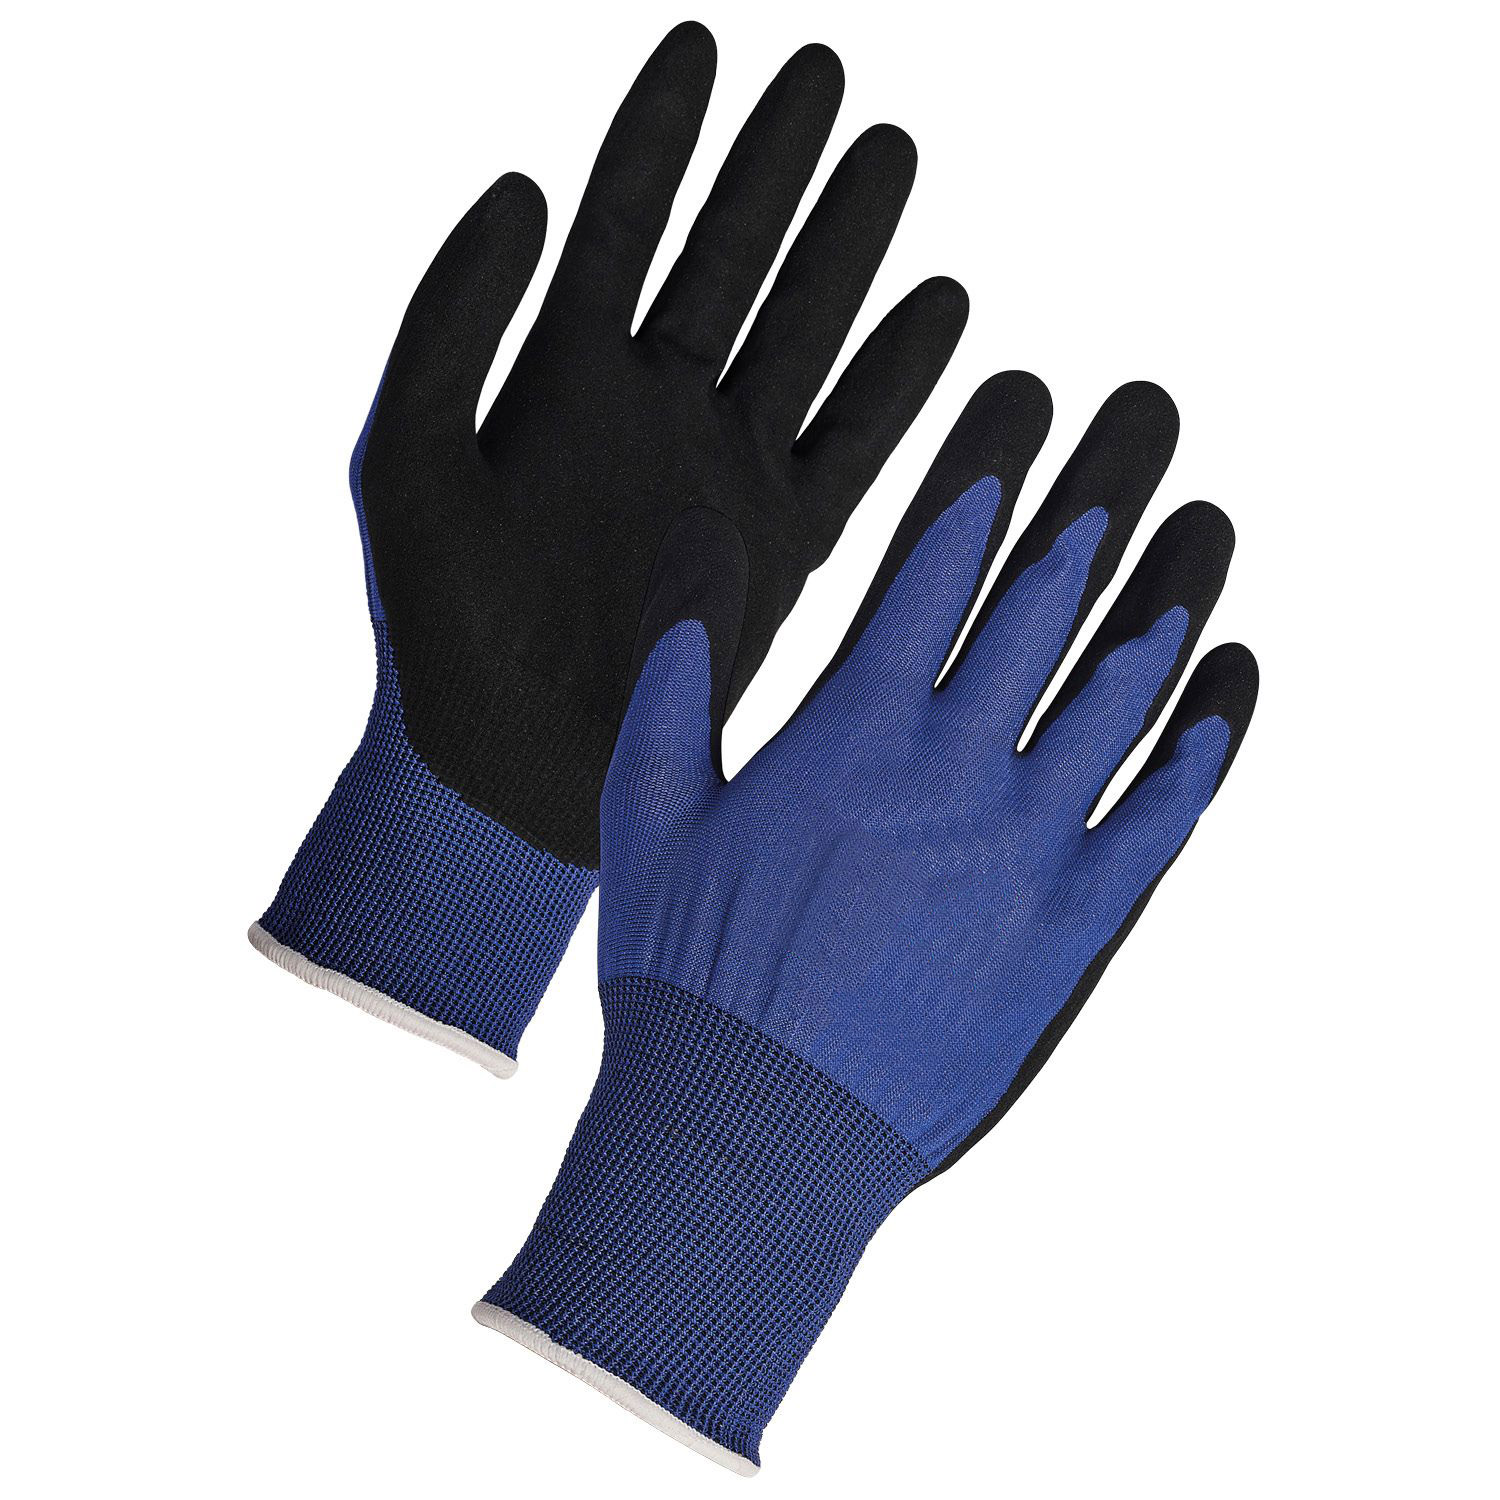 Ultra Thin Breathable Ultralight Cut Resistant Glove